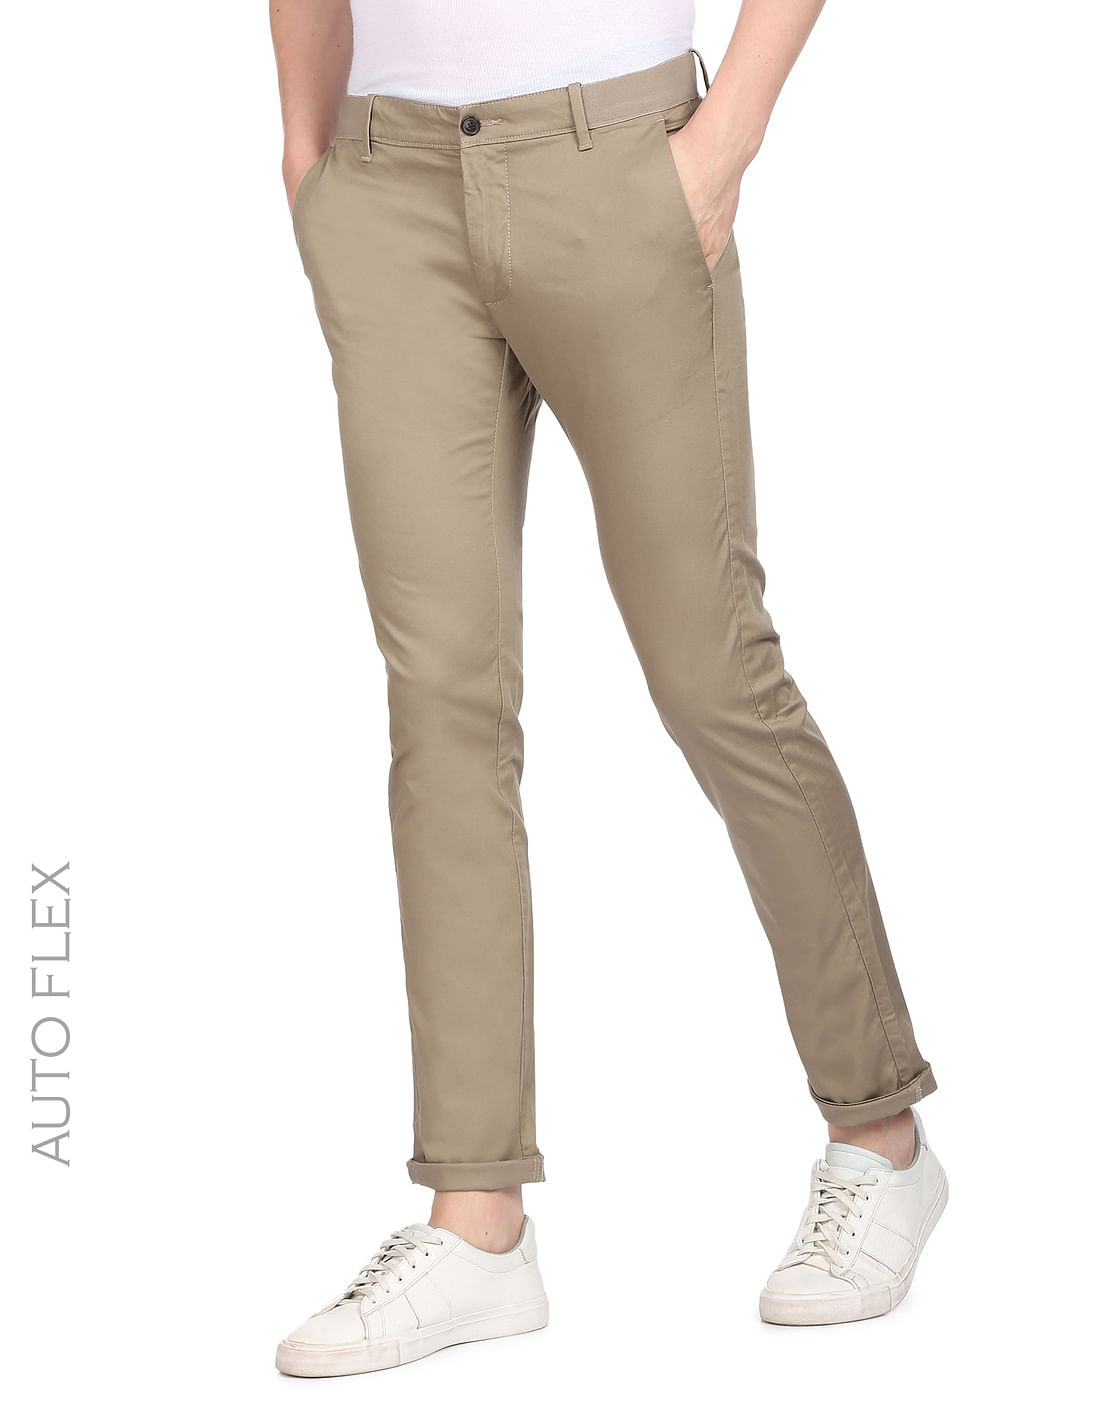 Buy Autoflex Slim Fit Trousers Green at Amazon.in